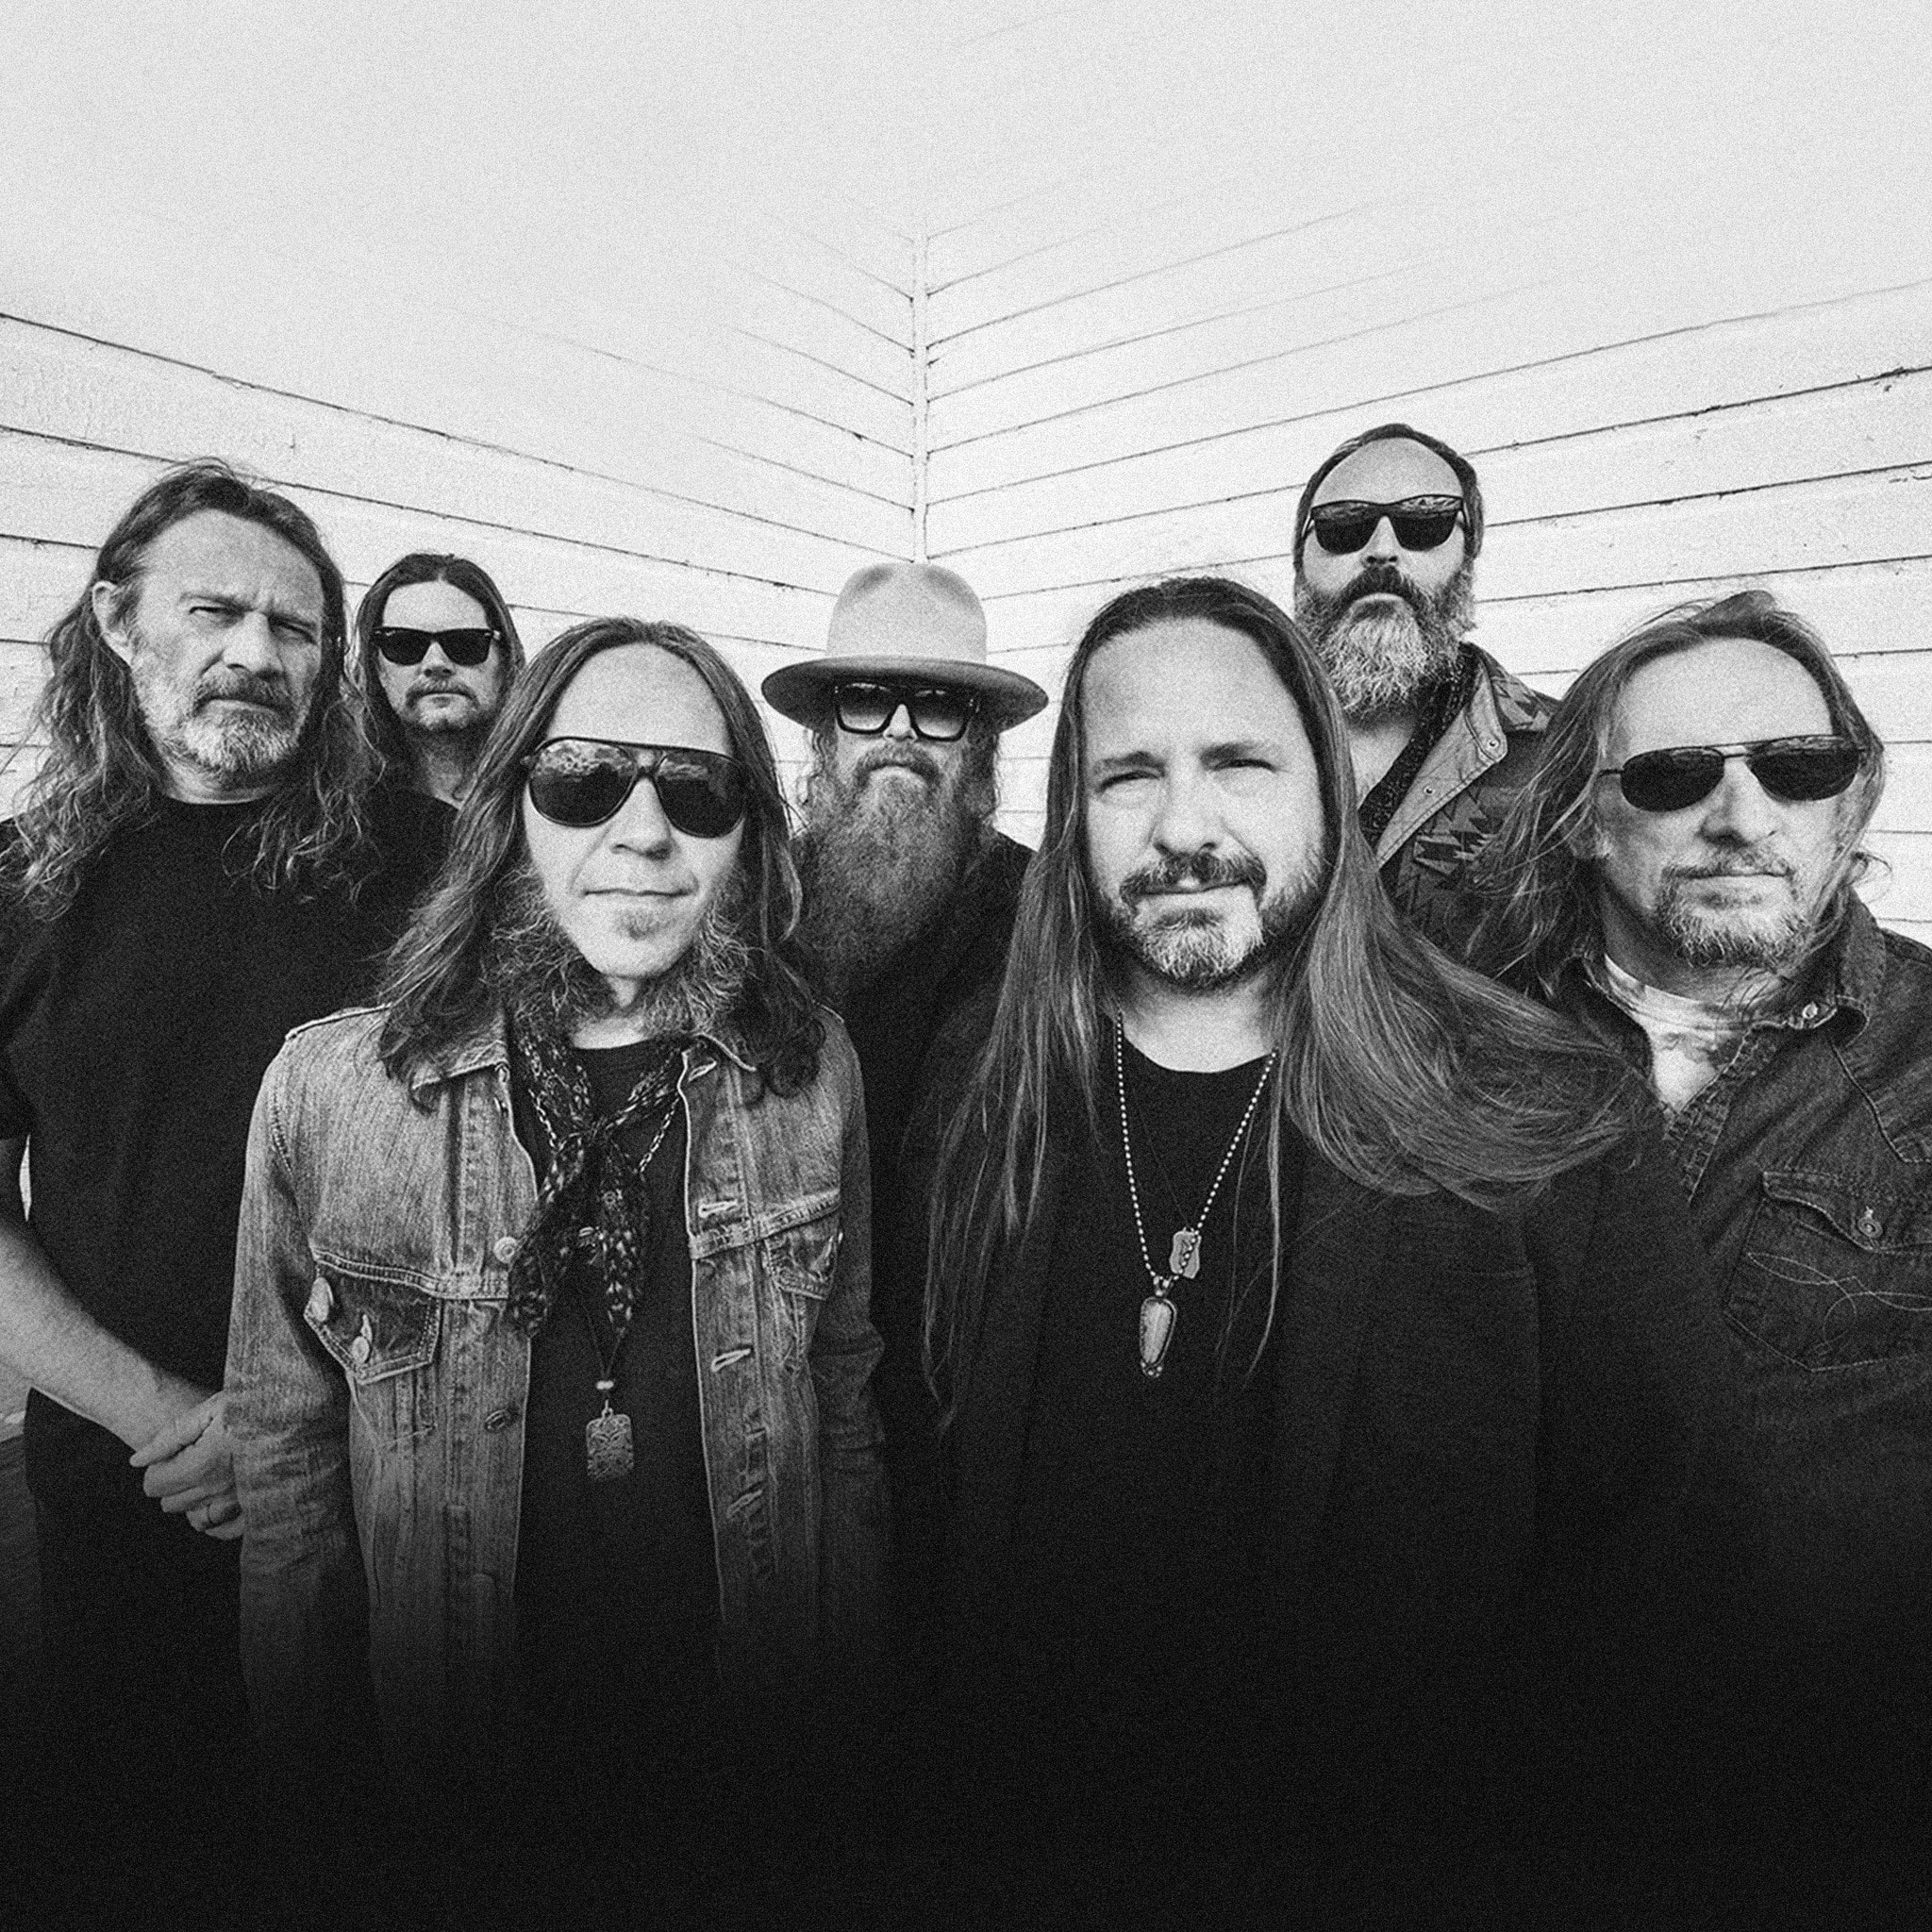 Brit Turner (pictured in the back center) died on March 3 at the age of 57. This photo depicts the members of Blackberry Smoke.